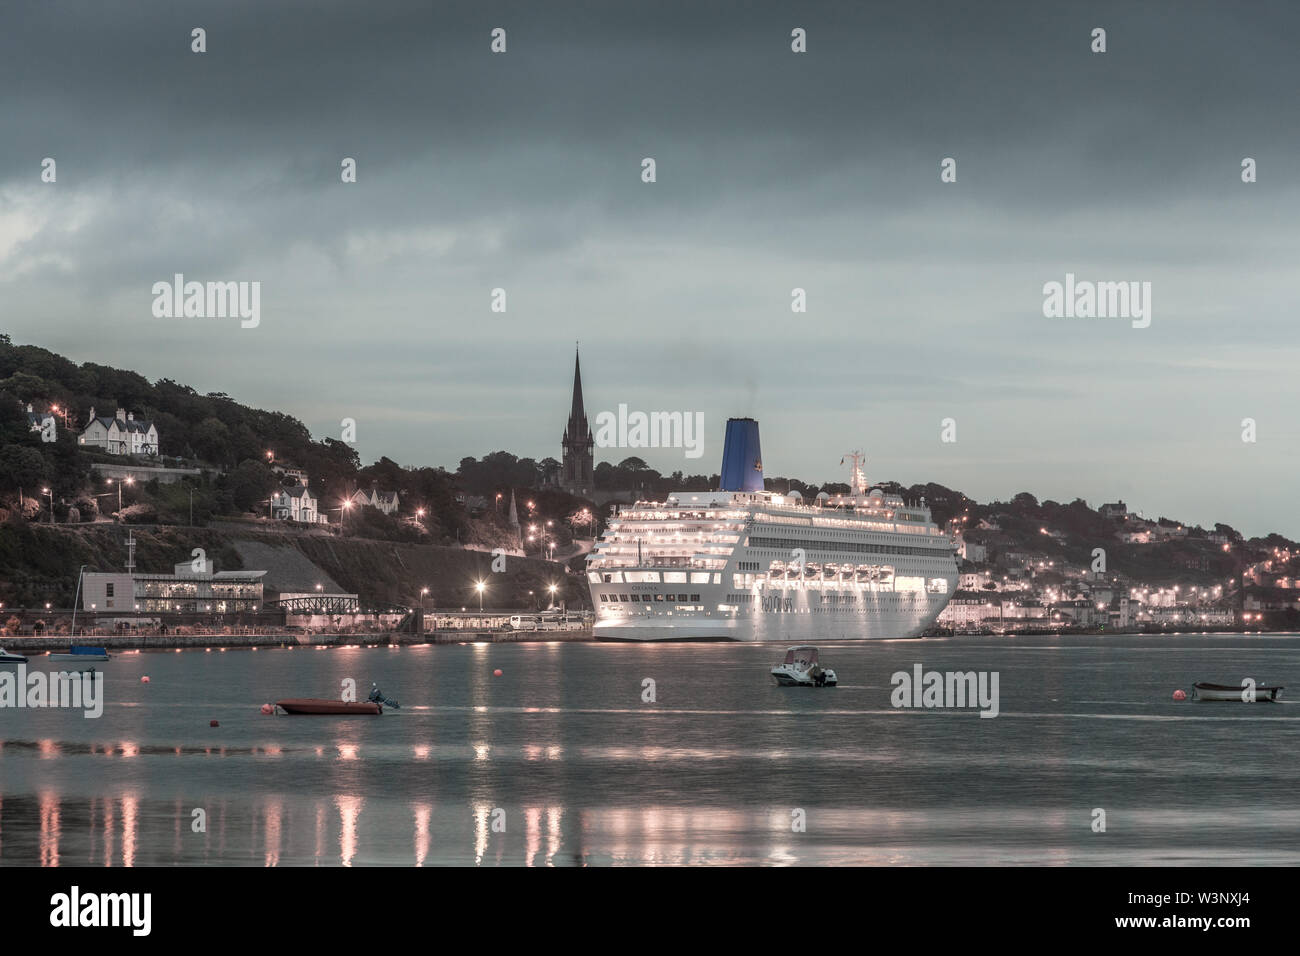 Cobh, Cork, Ireland. 17th July, 2019. P&O Cruise ship Oriana with 1,800 passengers docked at the deep water berth during a overnight stay in Cobh, Co. Cork, Ireland. Credit: David Creedon/Alamy Live News Stock Photo